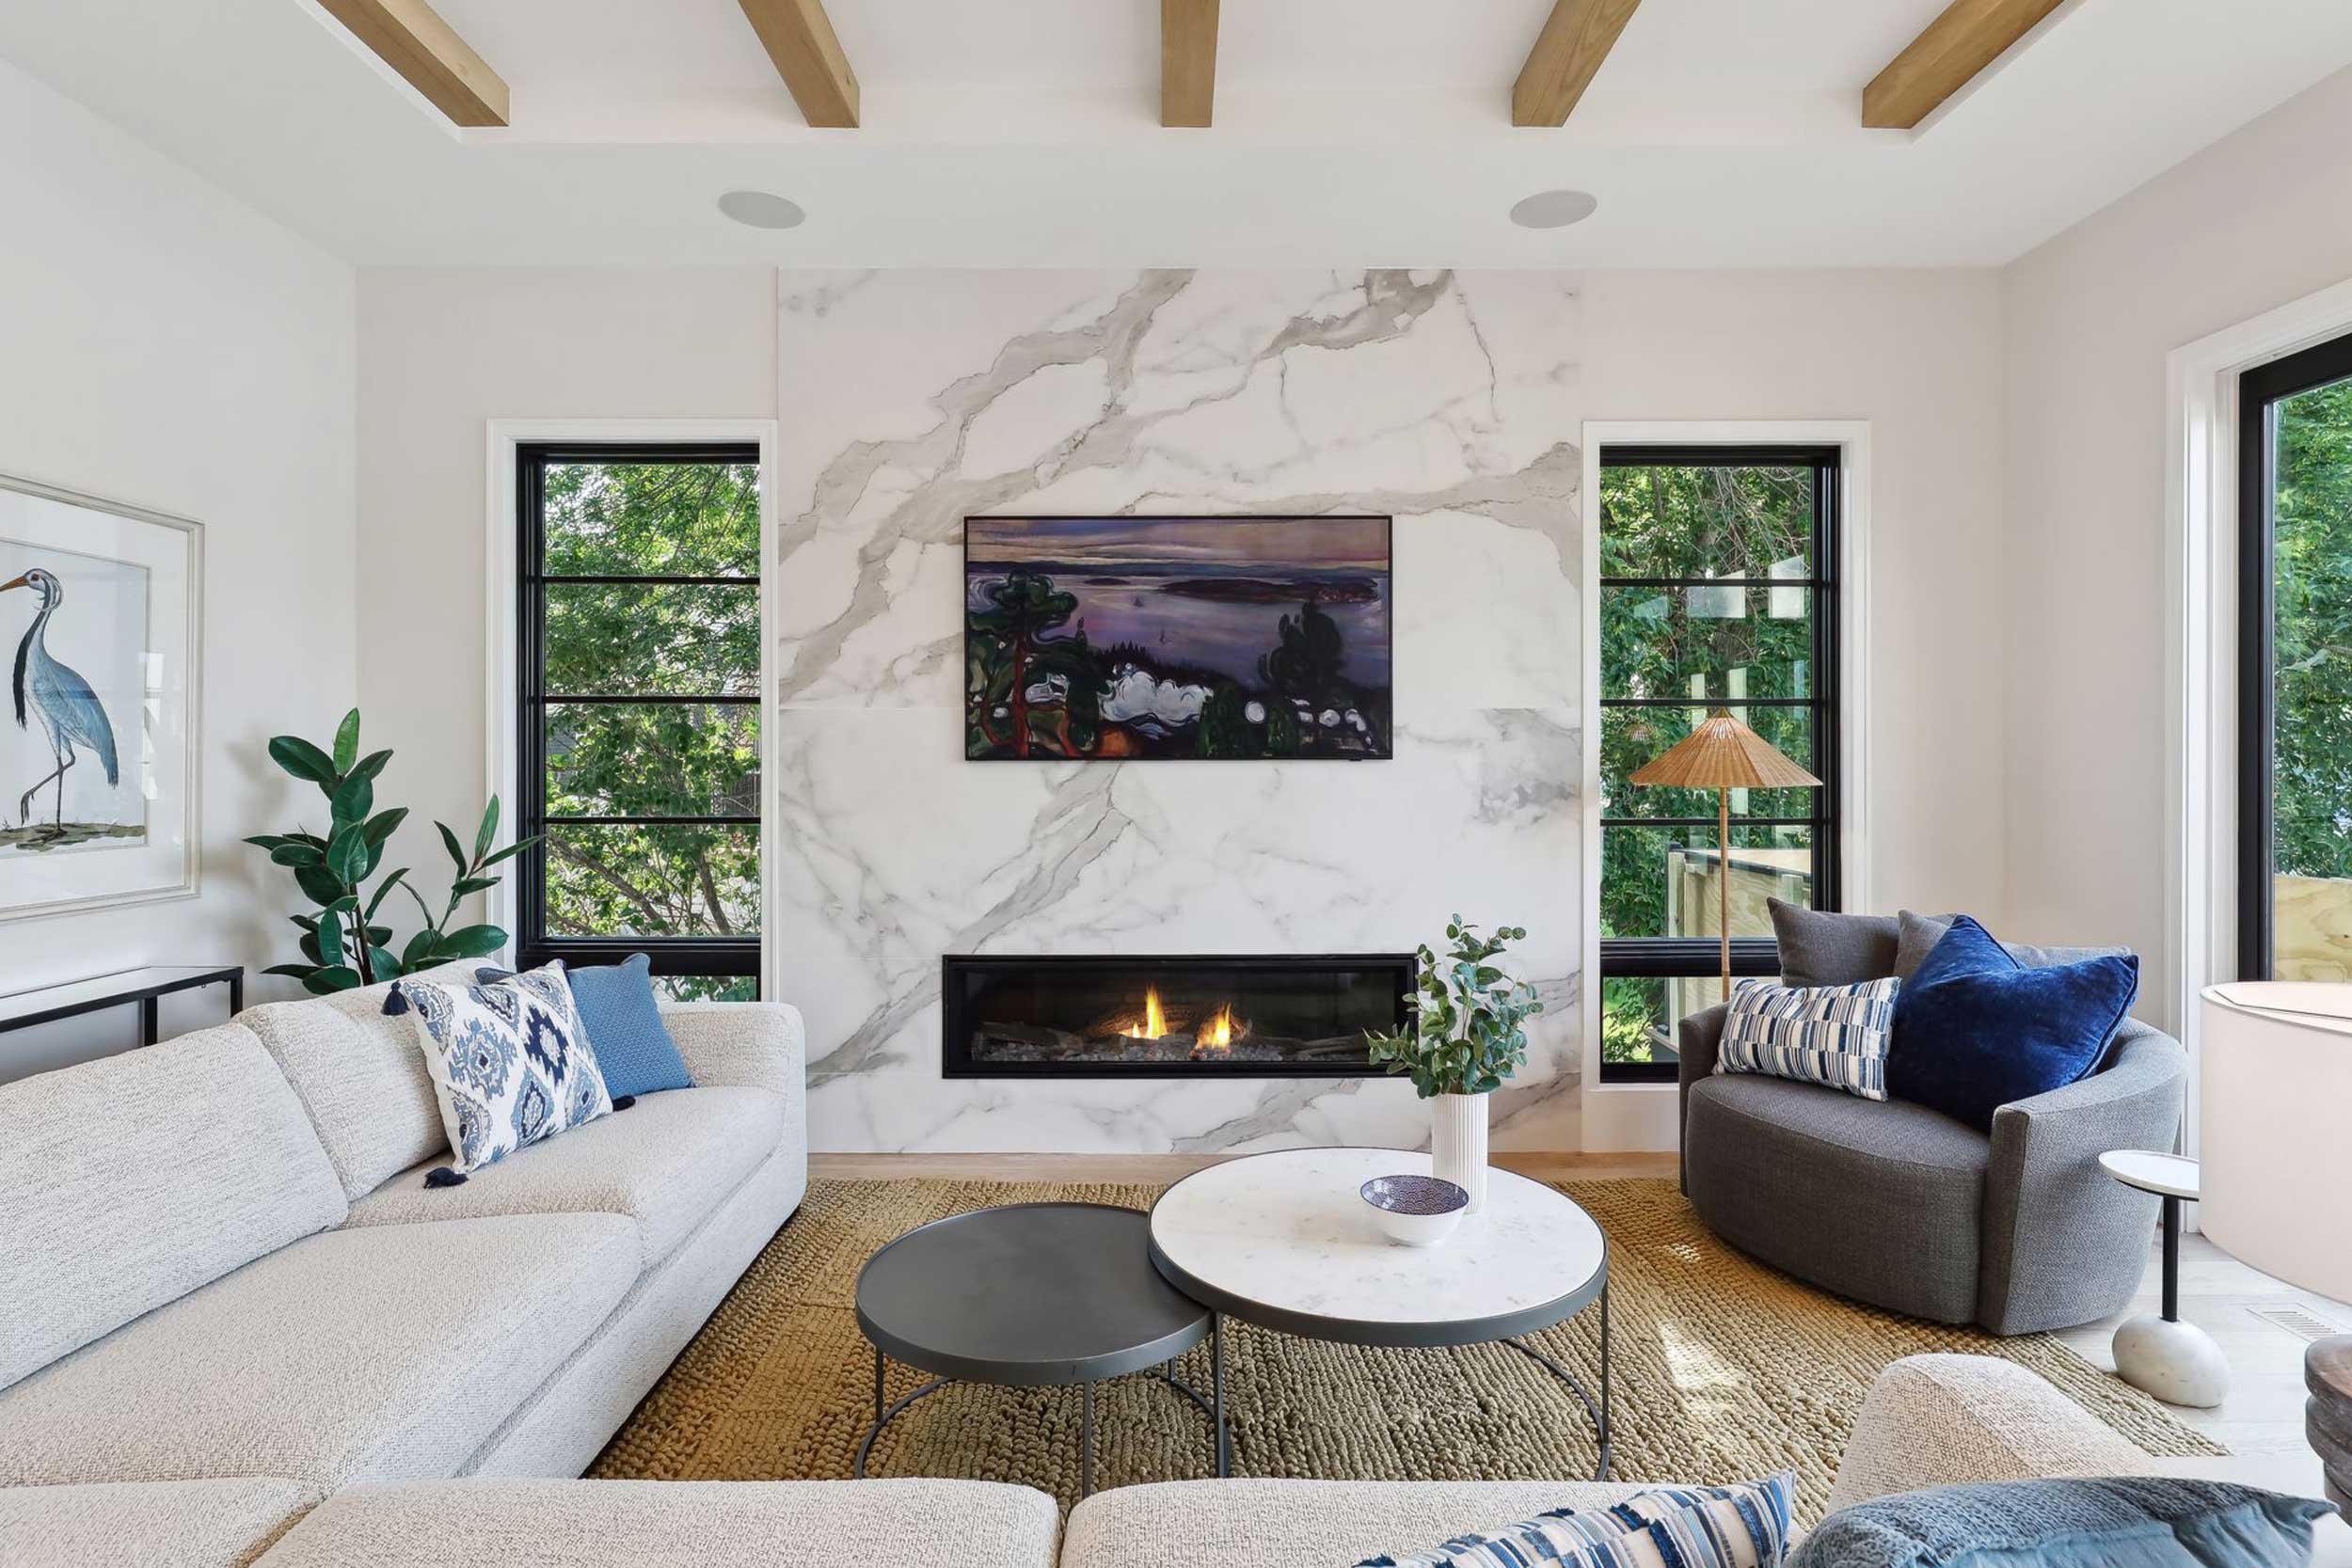 Large-format Porcelain Sintered Stone Fireplace Cladding in White Classico